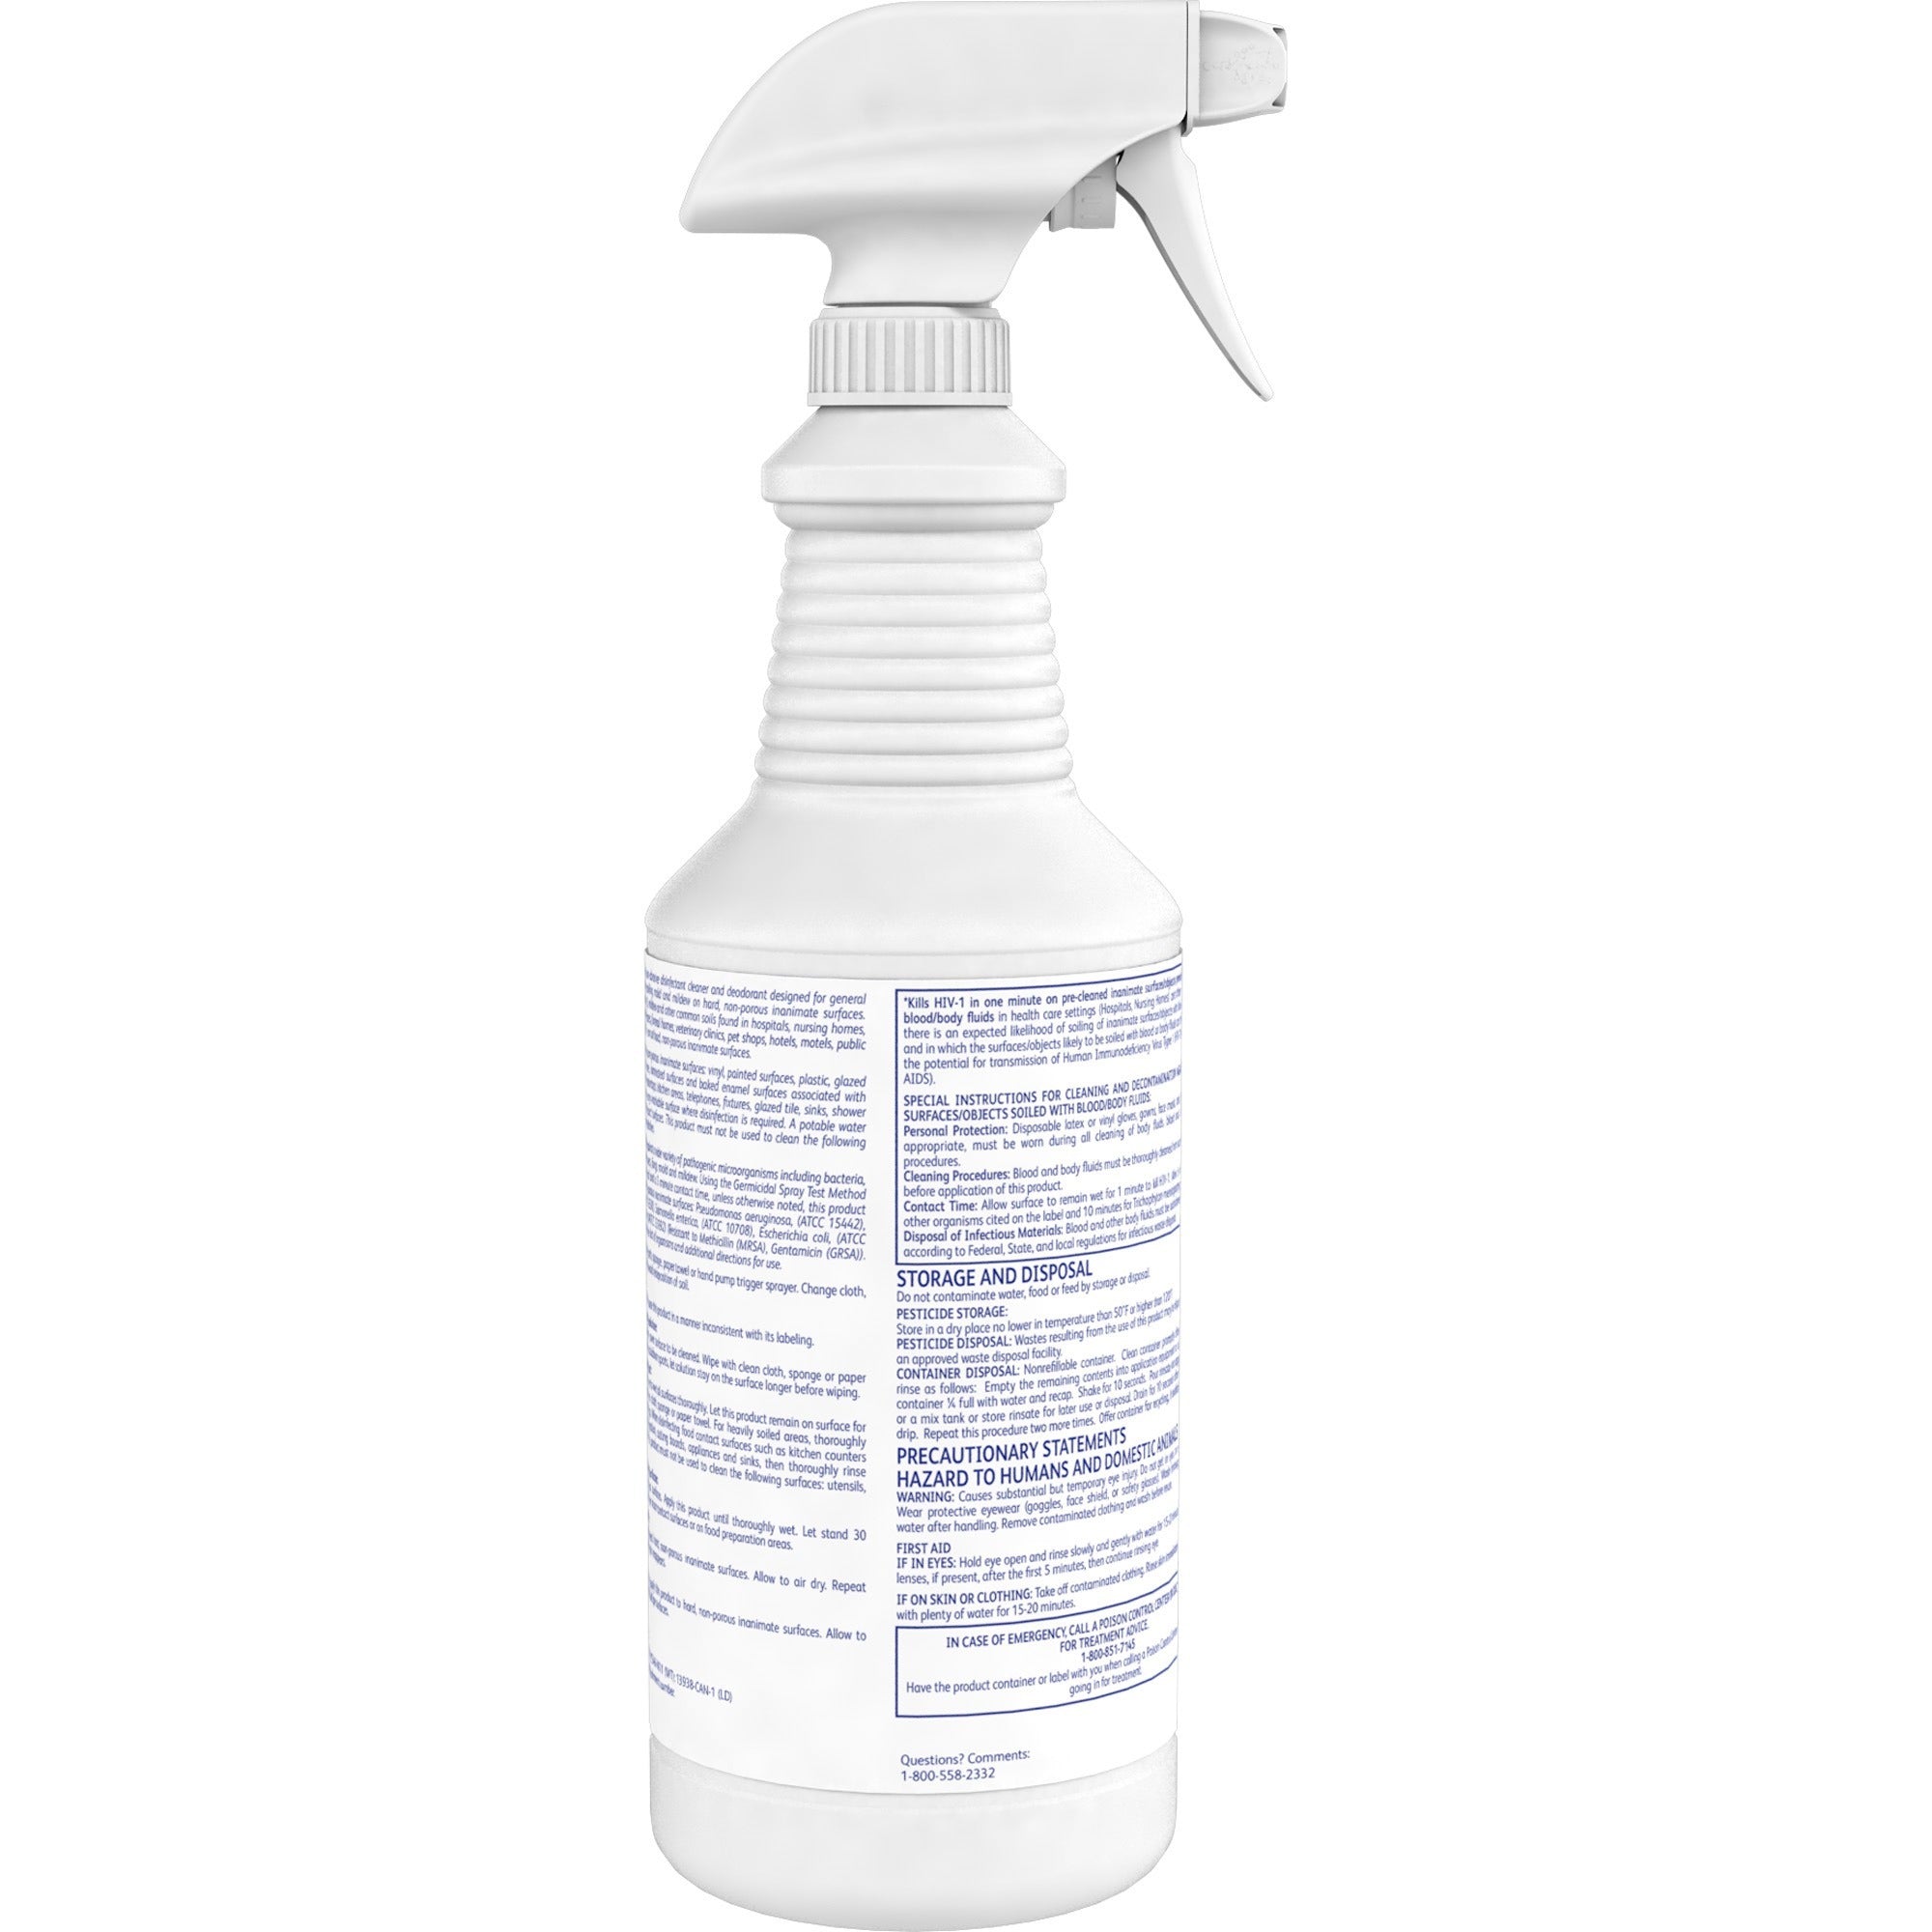 diversey-envy-liquid-disinfectant-cleaner-ready-to-use-32-fl-oz-1-quart-lavender-ammonia-scent-1-each-color-free-disinfectant-virucidal-bactericide-fungicide-mildewstatic-rinse-free-non-abrasive-deodorize-clear_dvo04528 - 4